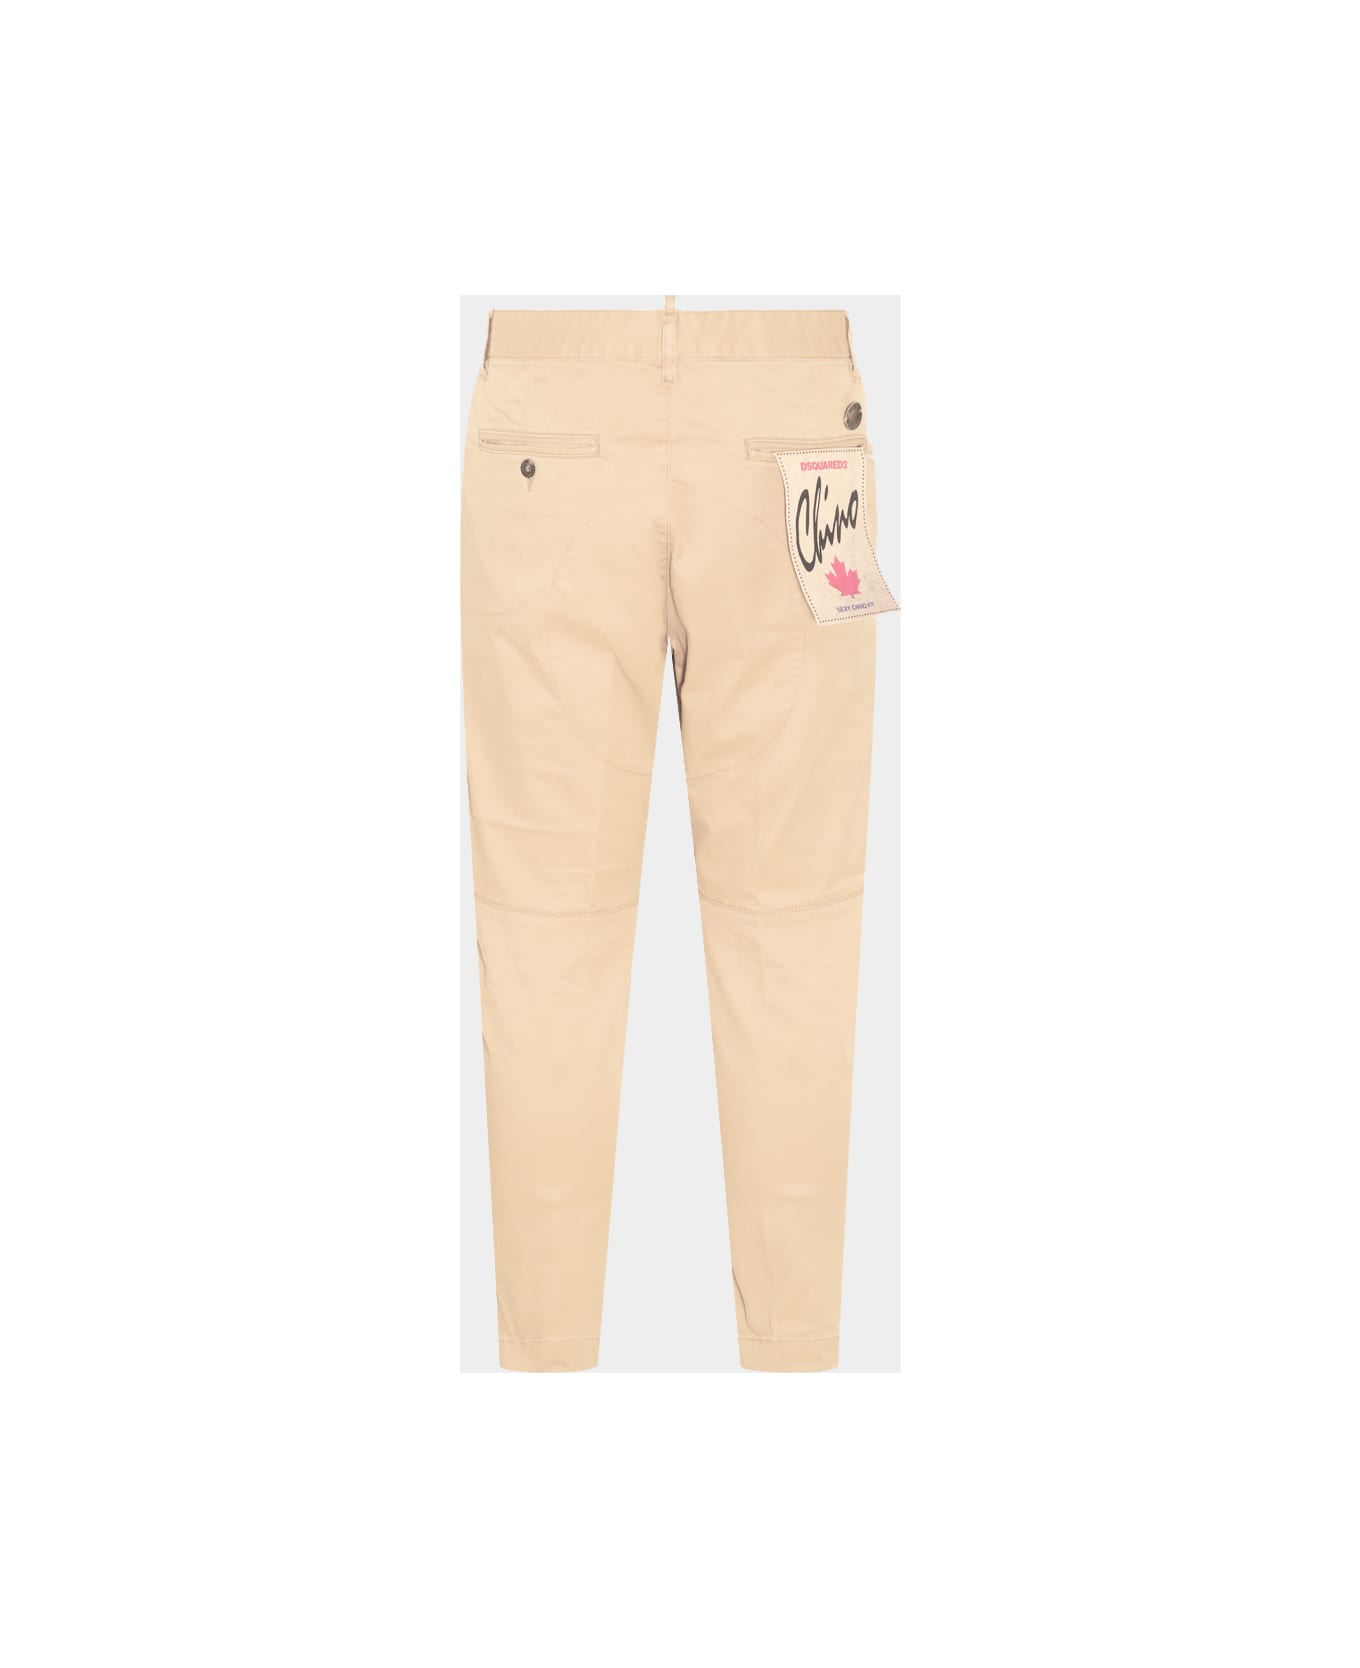 Dsquared2 Beige Cotton Blend Trousers - Stone ボトムス